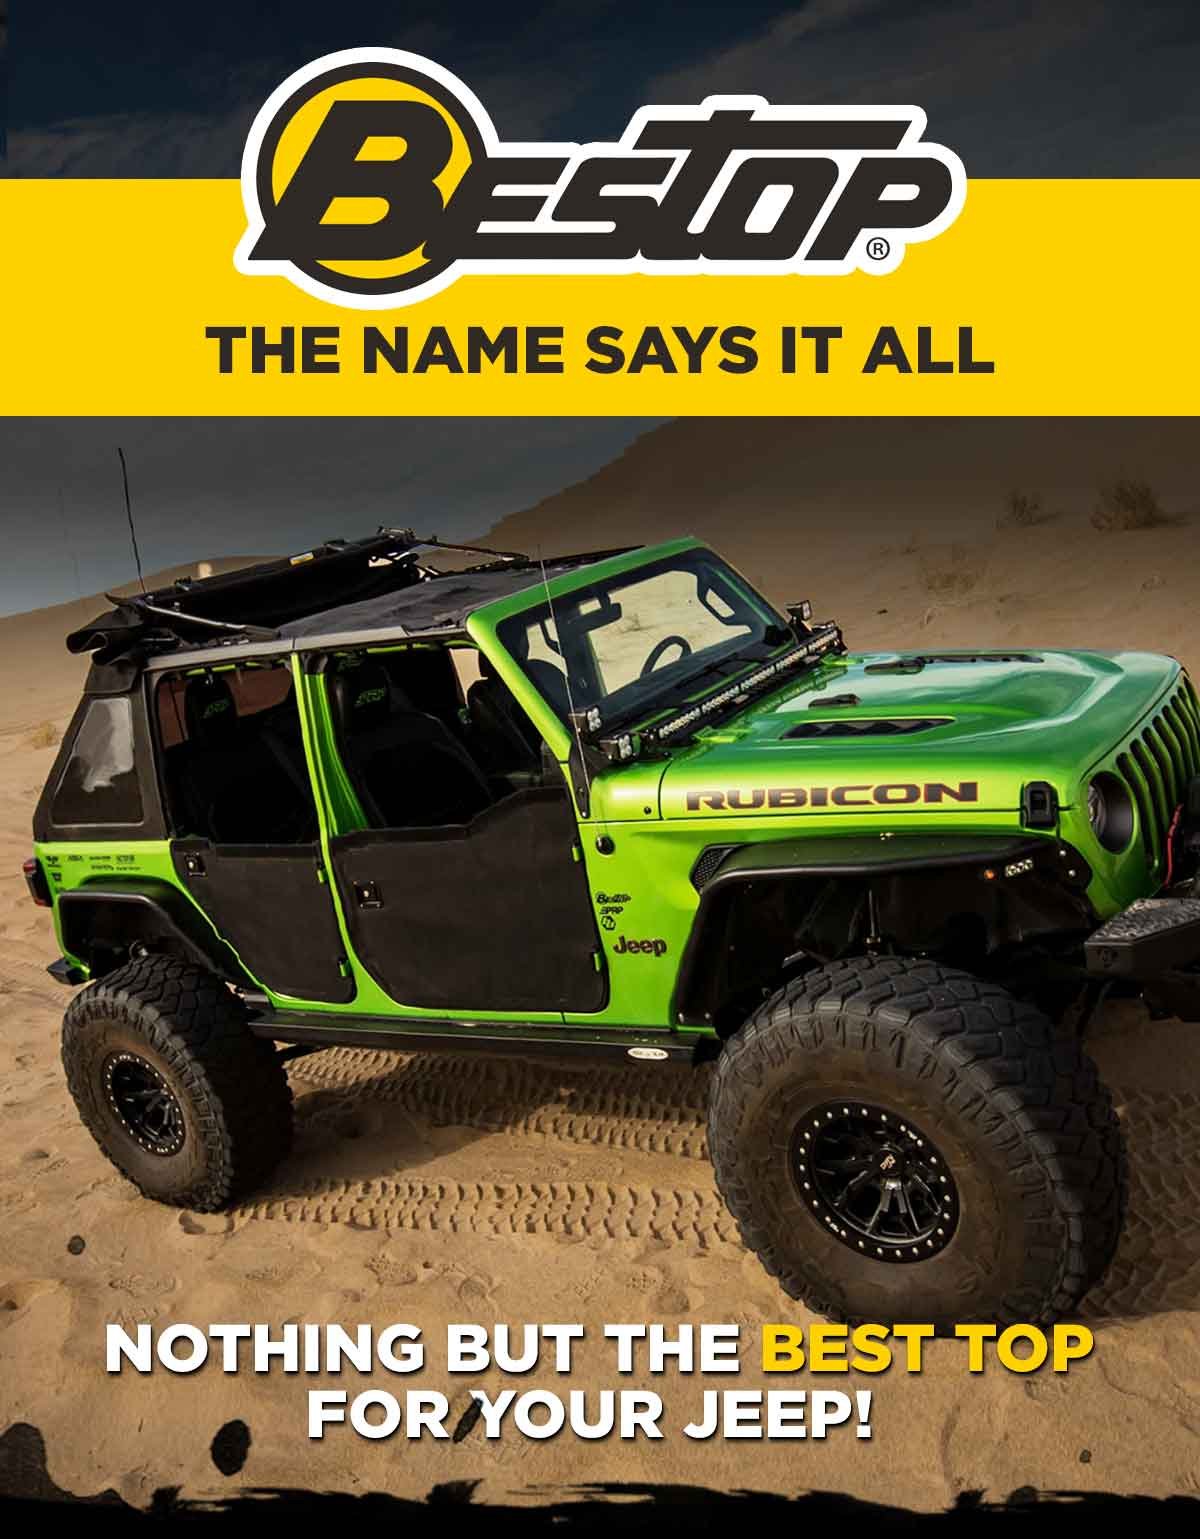 Bestop - The Name Says It All. Nothing But The Best Top for Your Jeep!